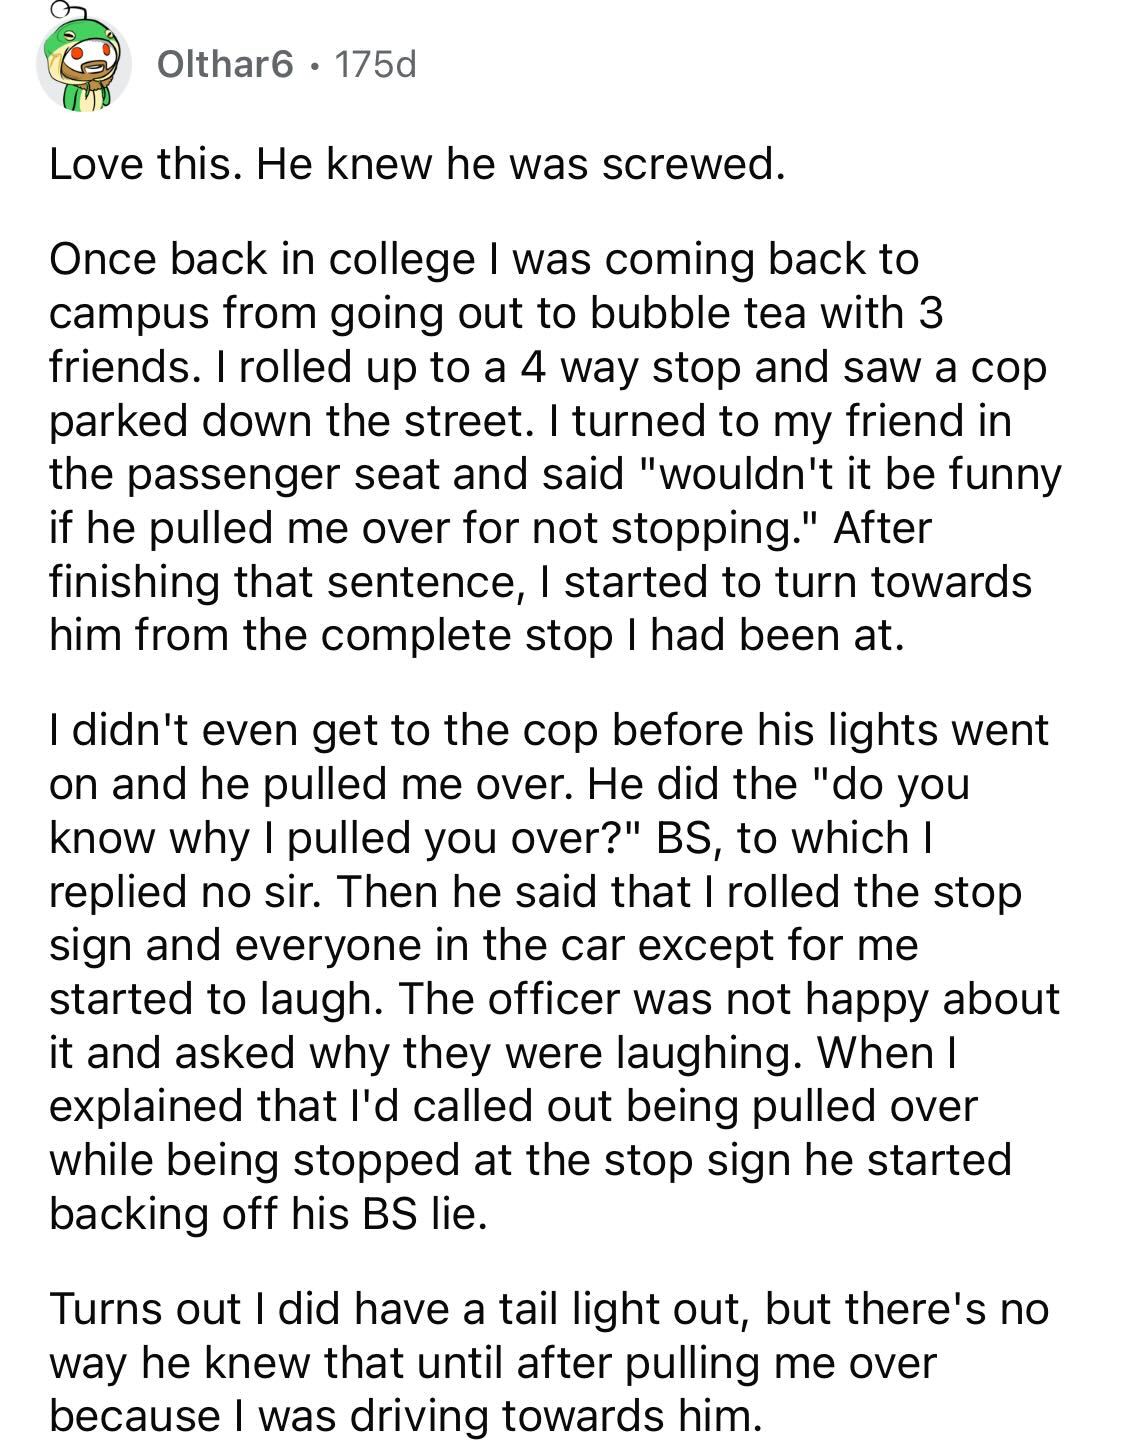 Maliciously Compliant Deaf Driver - Love this. He knew he was screwed. Once back in college I was coming back to campus from going out to bubble tea with 3 friends. I rolled up to a 4 way stop and saw a cop parked down the street. I turned to my friend in